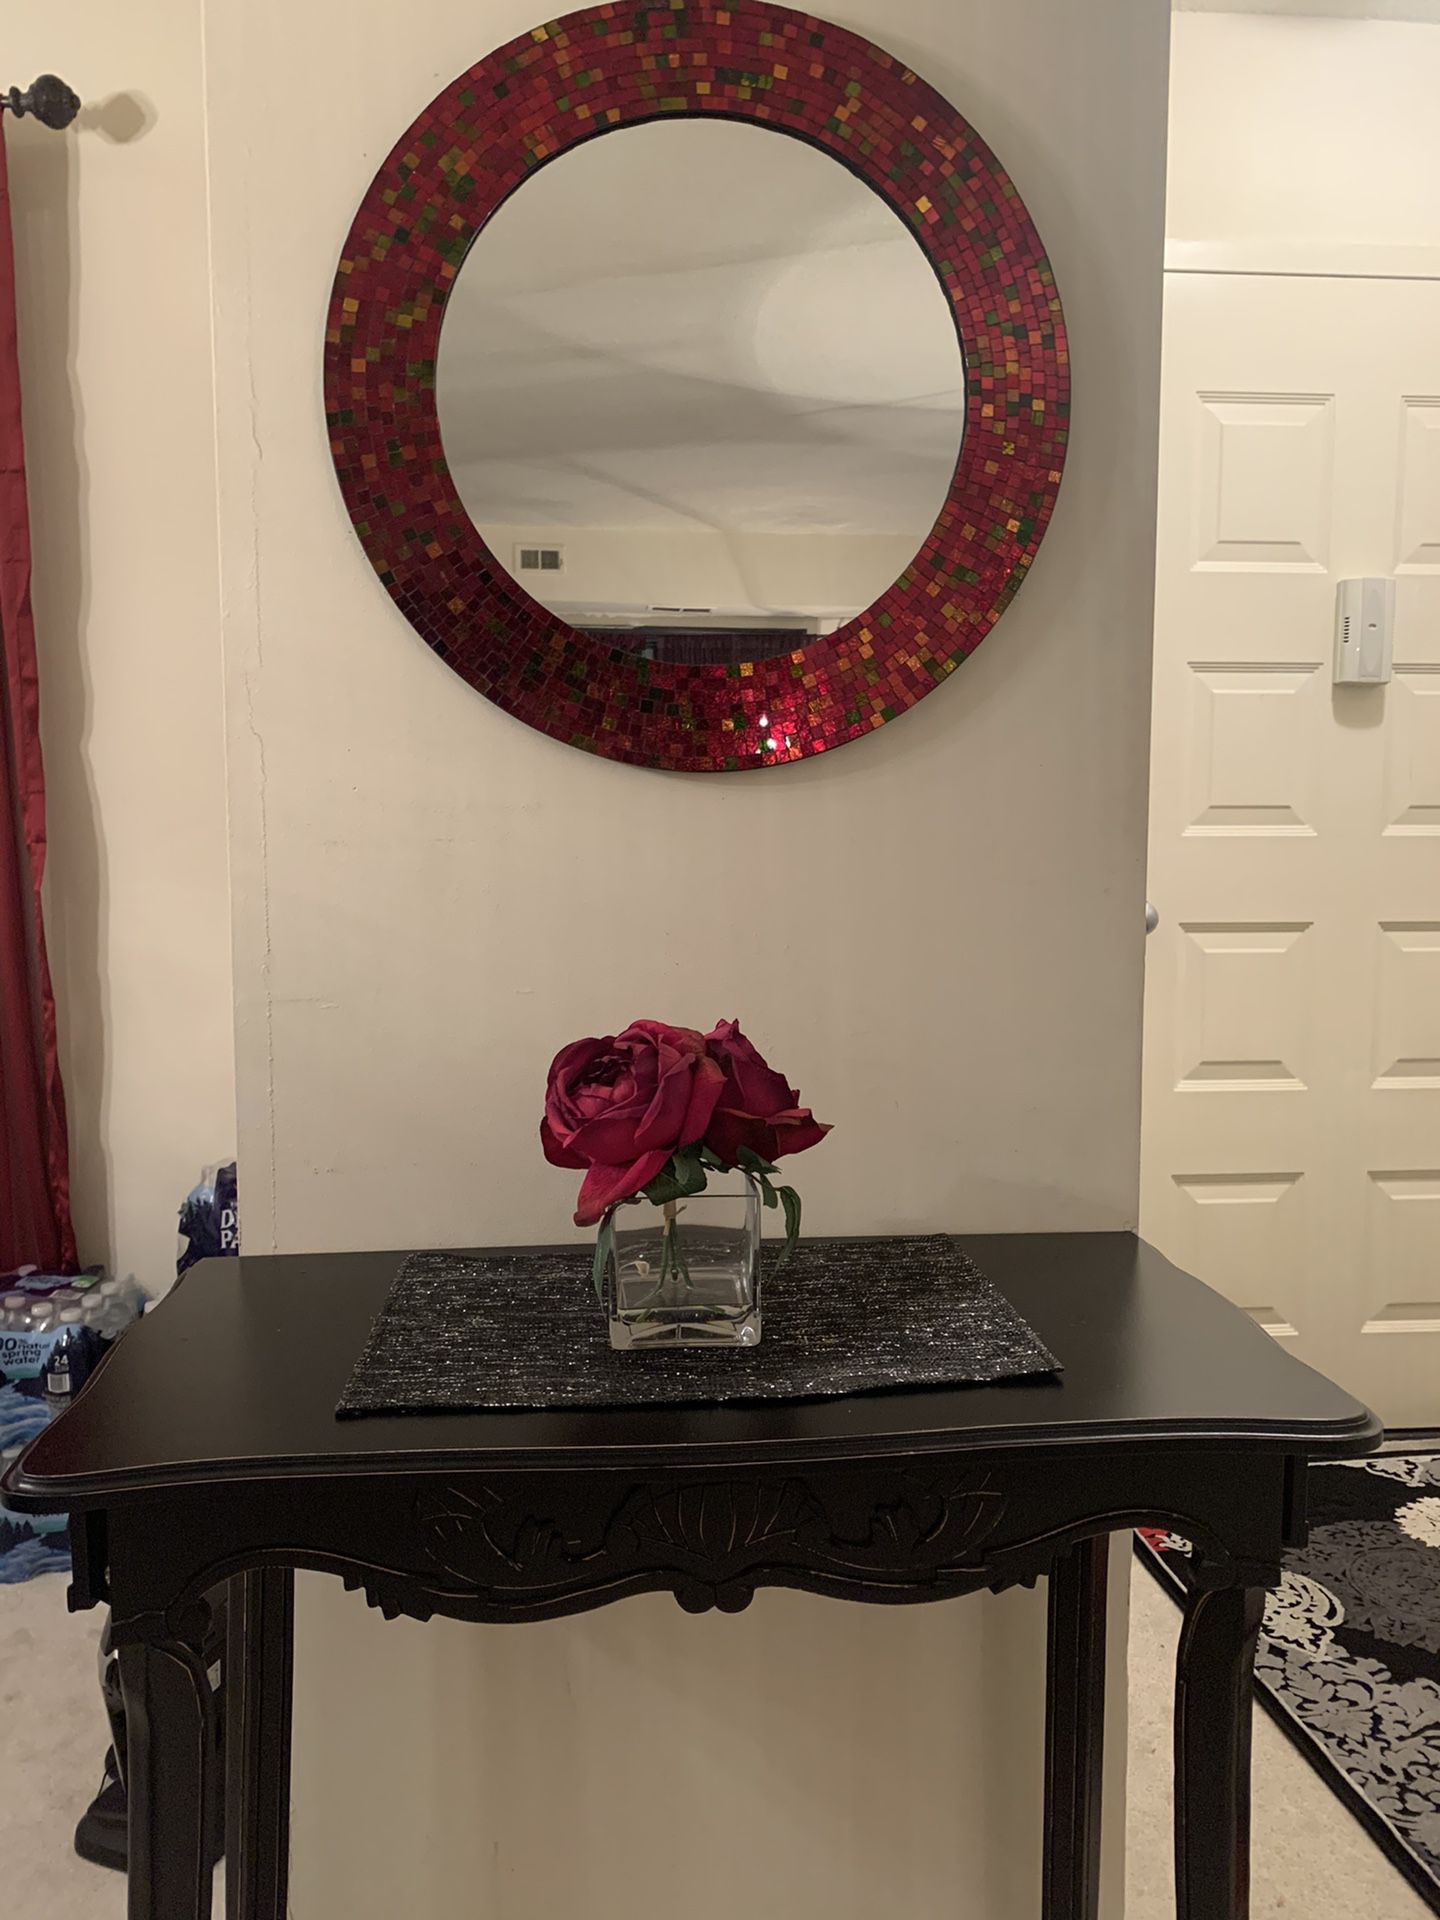 Entry table with a mirror and rug.